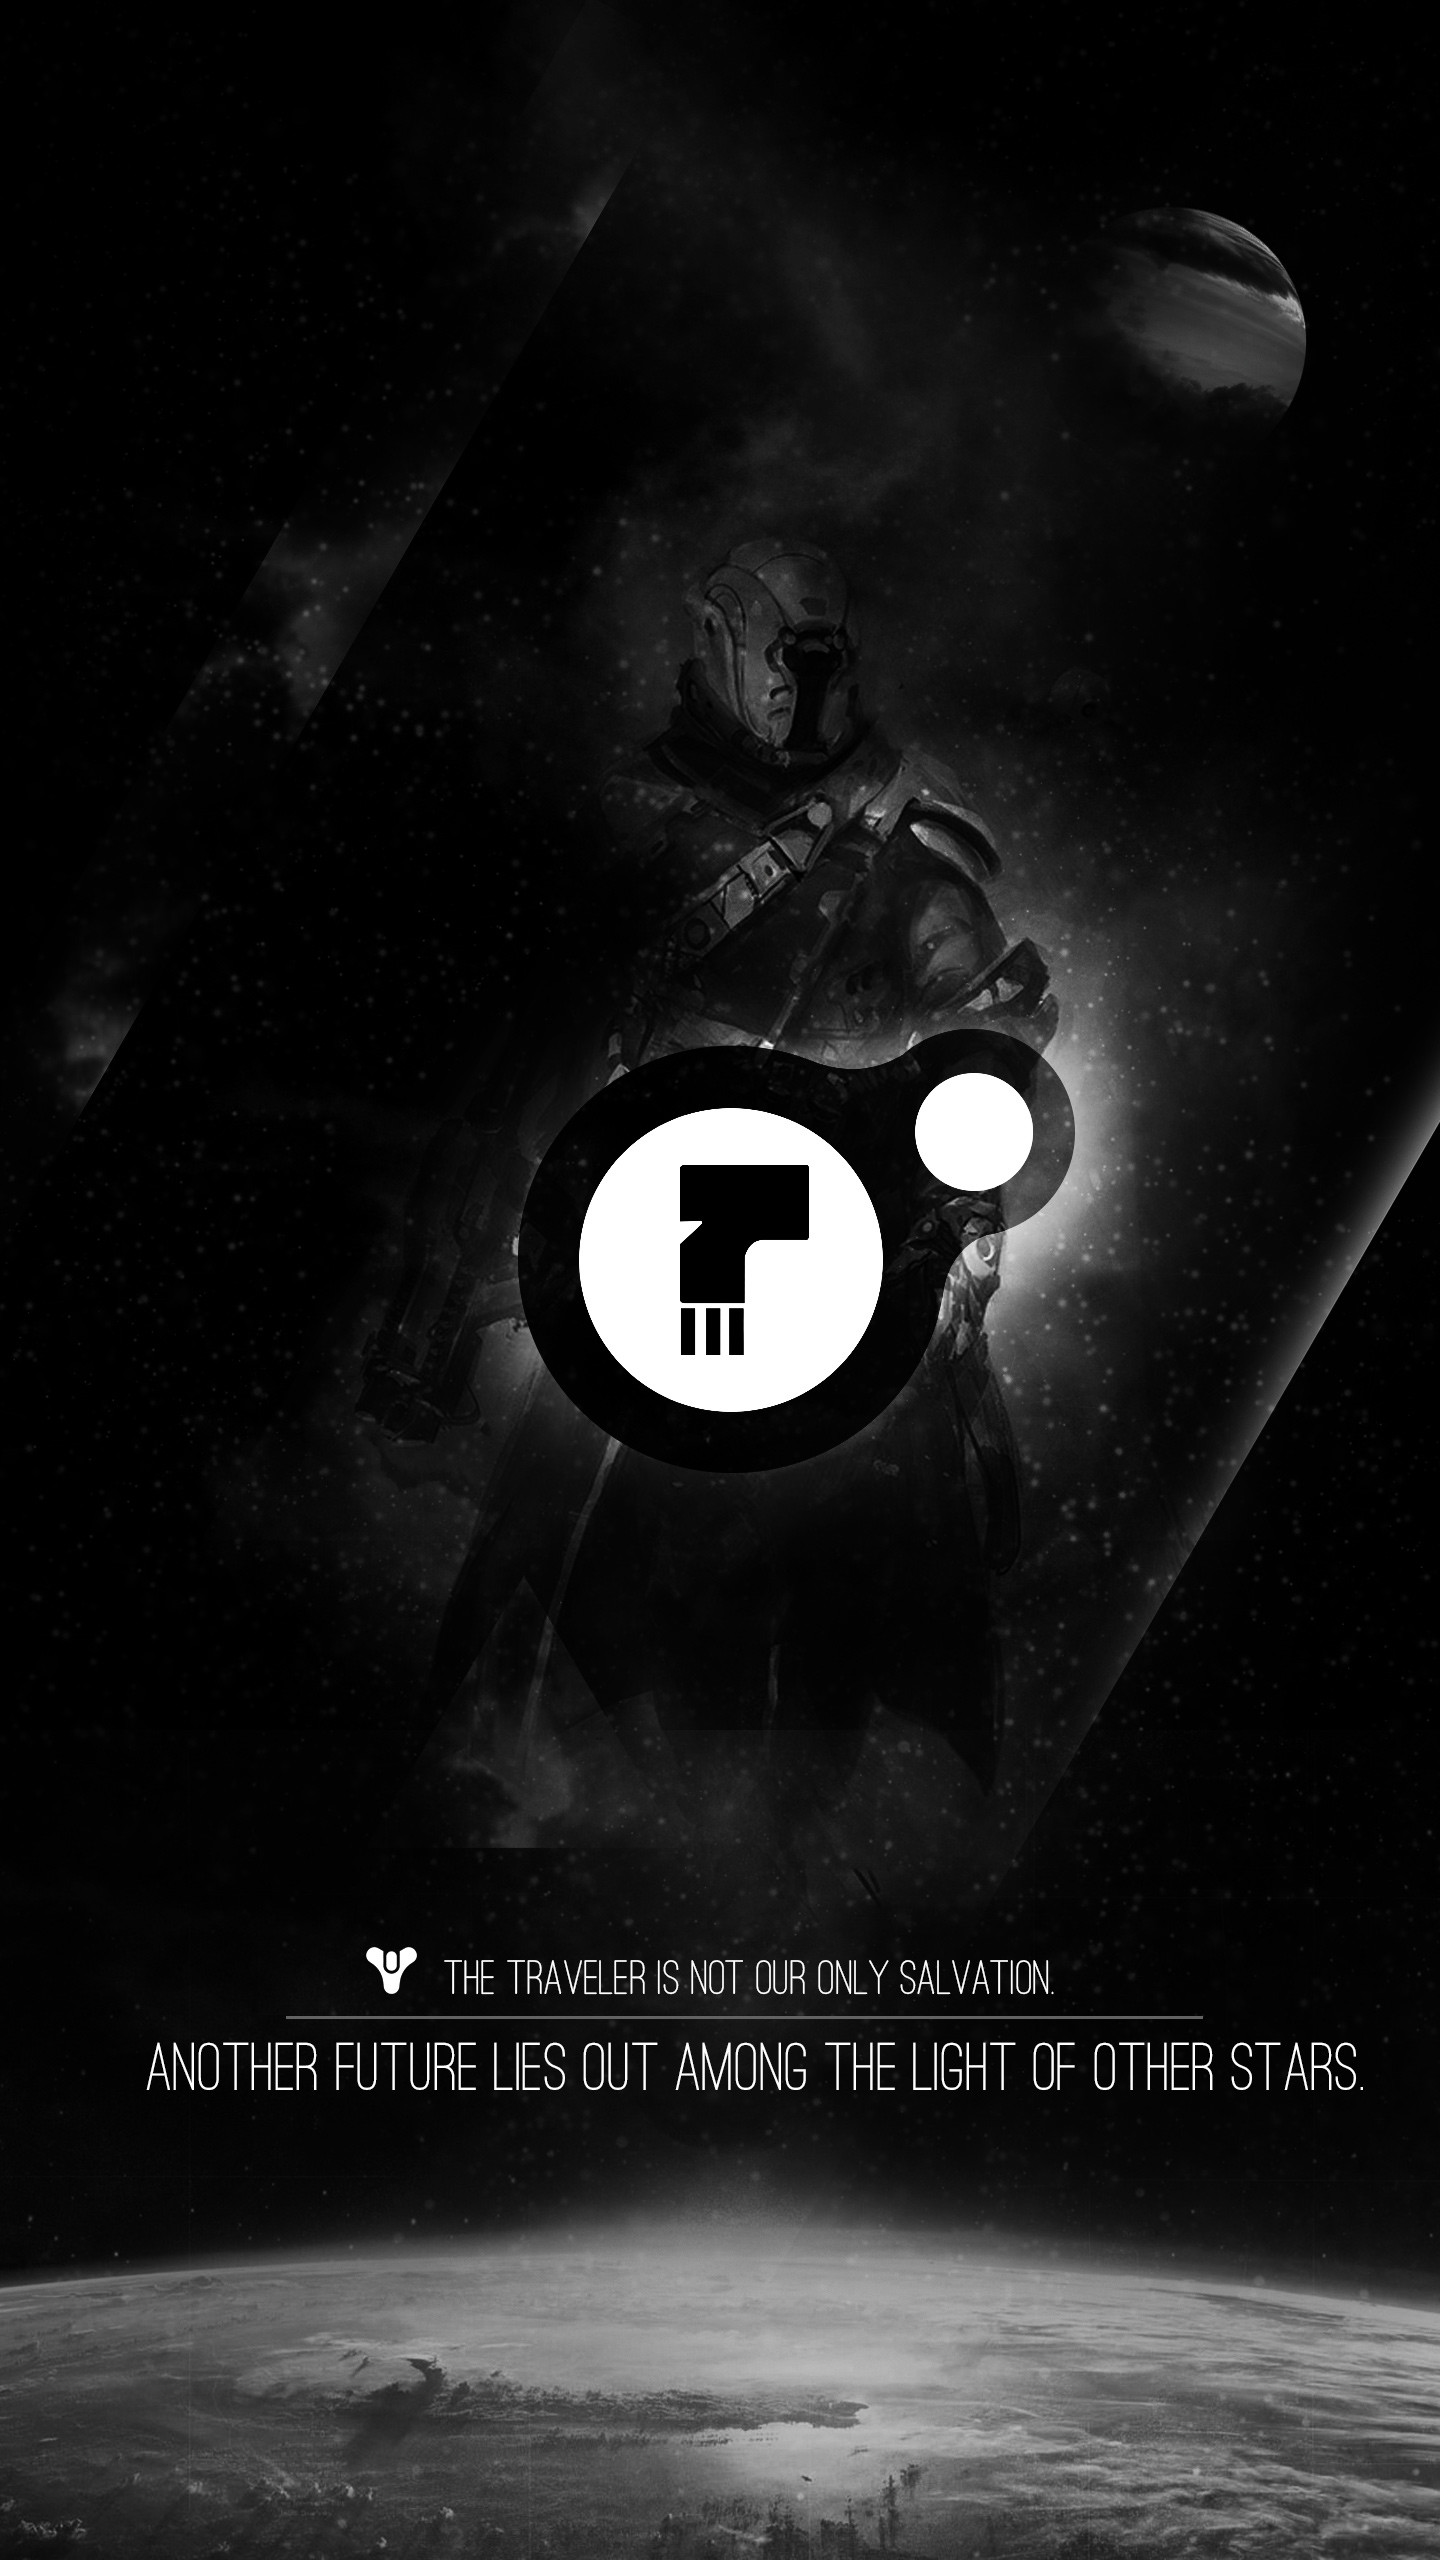 Media As requested – Factions Mobile Wallpaper DestinyTheGame